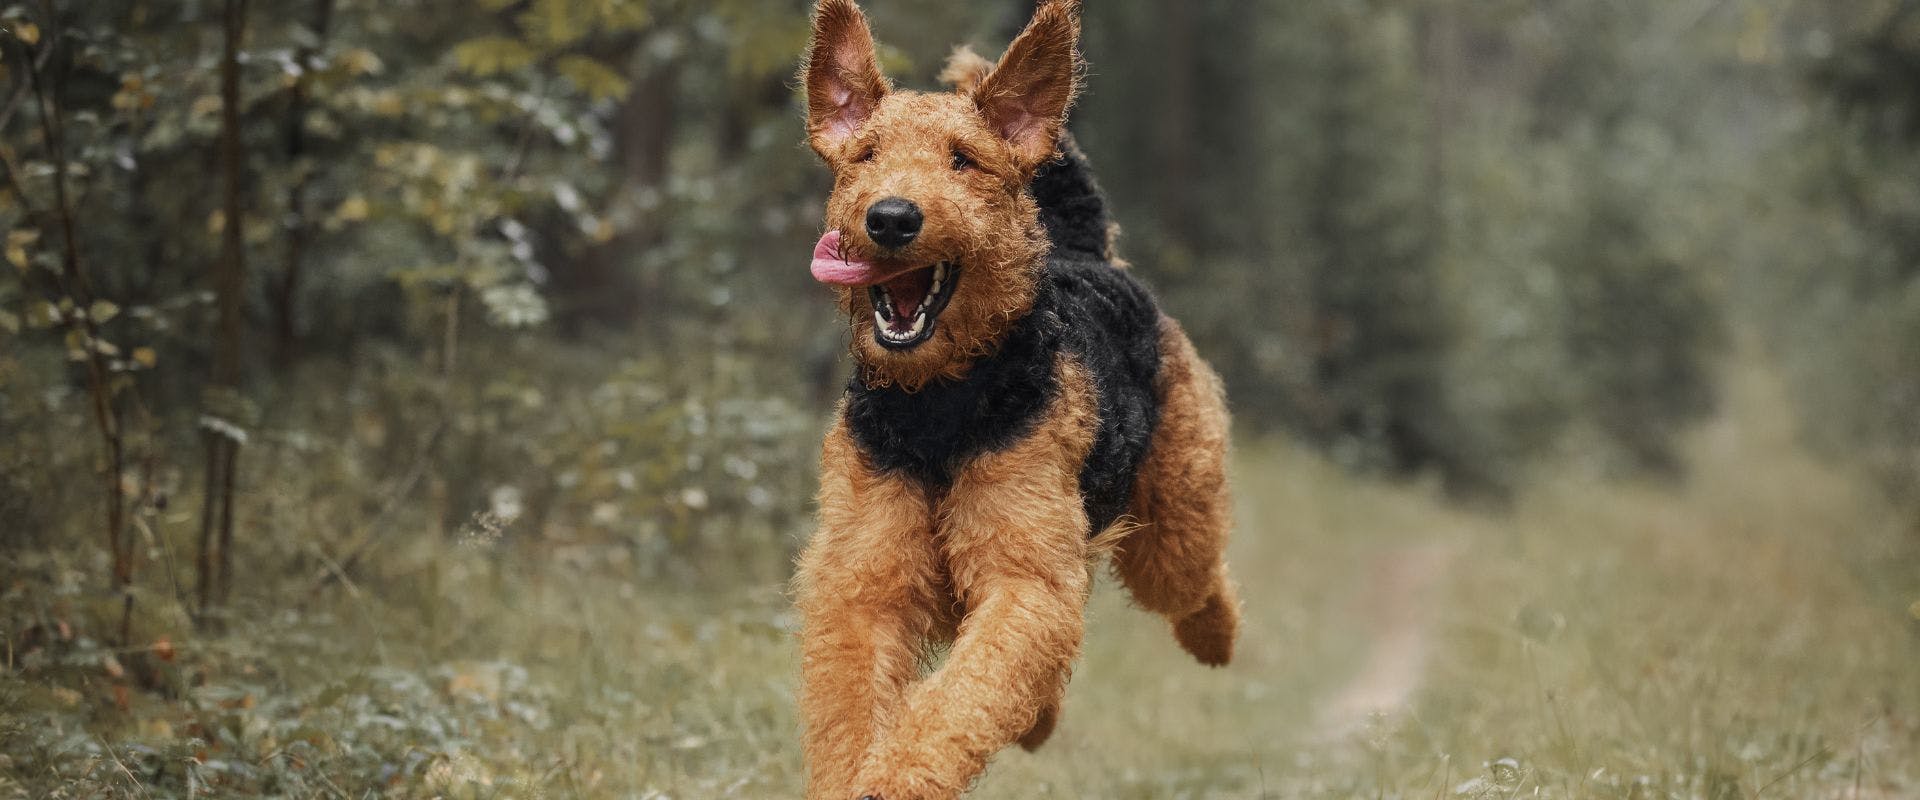 Airedale Terrier running in the woods